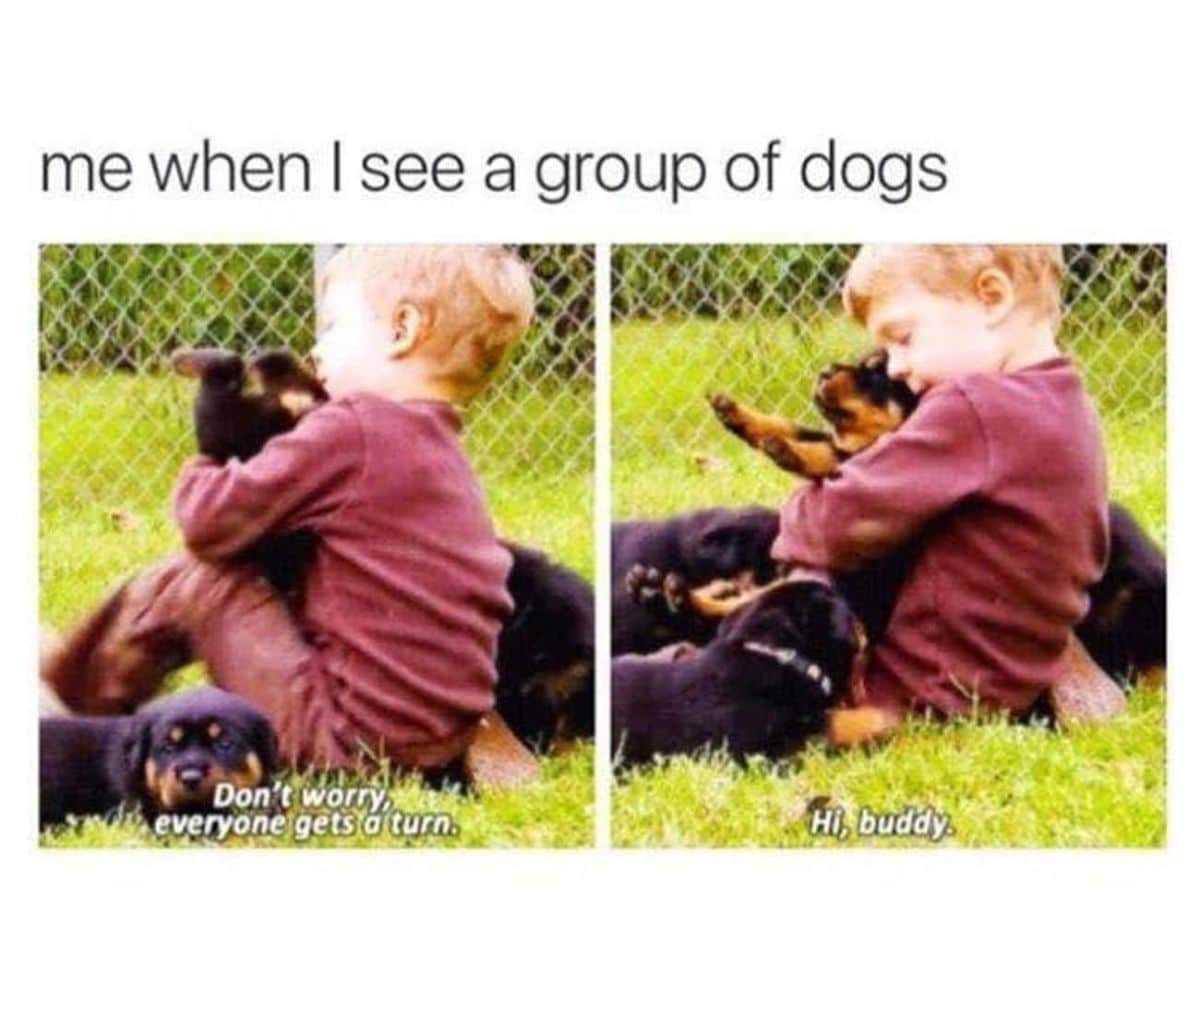 2 photos of a boy hugging black and brown puppies sitting on grass